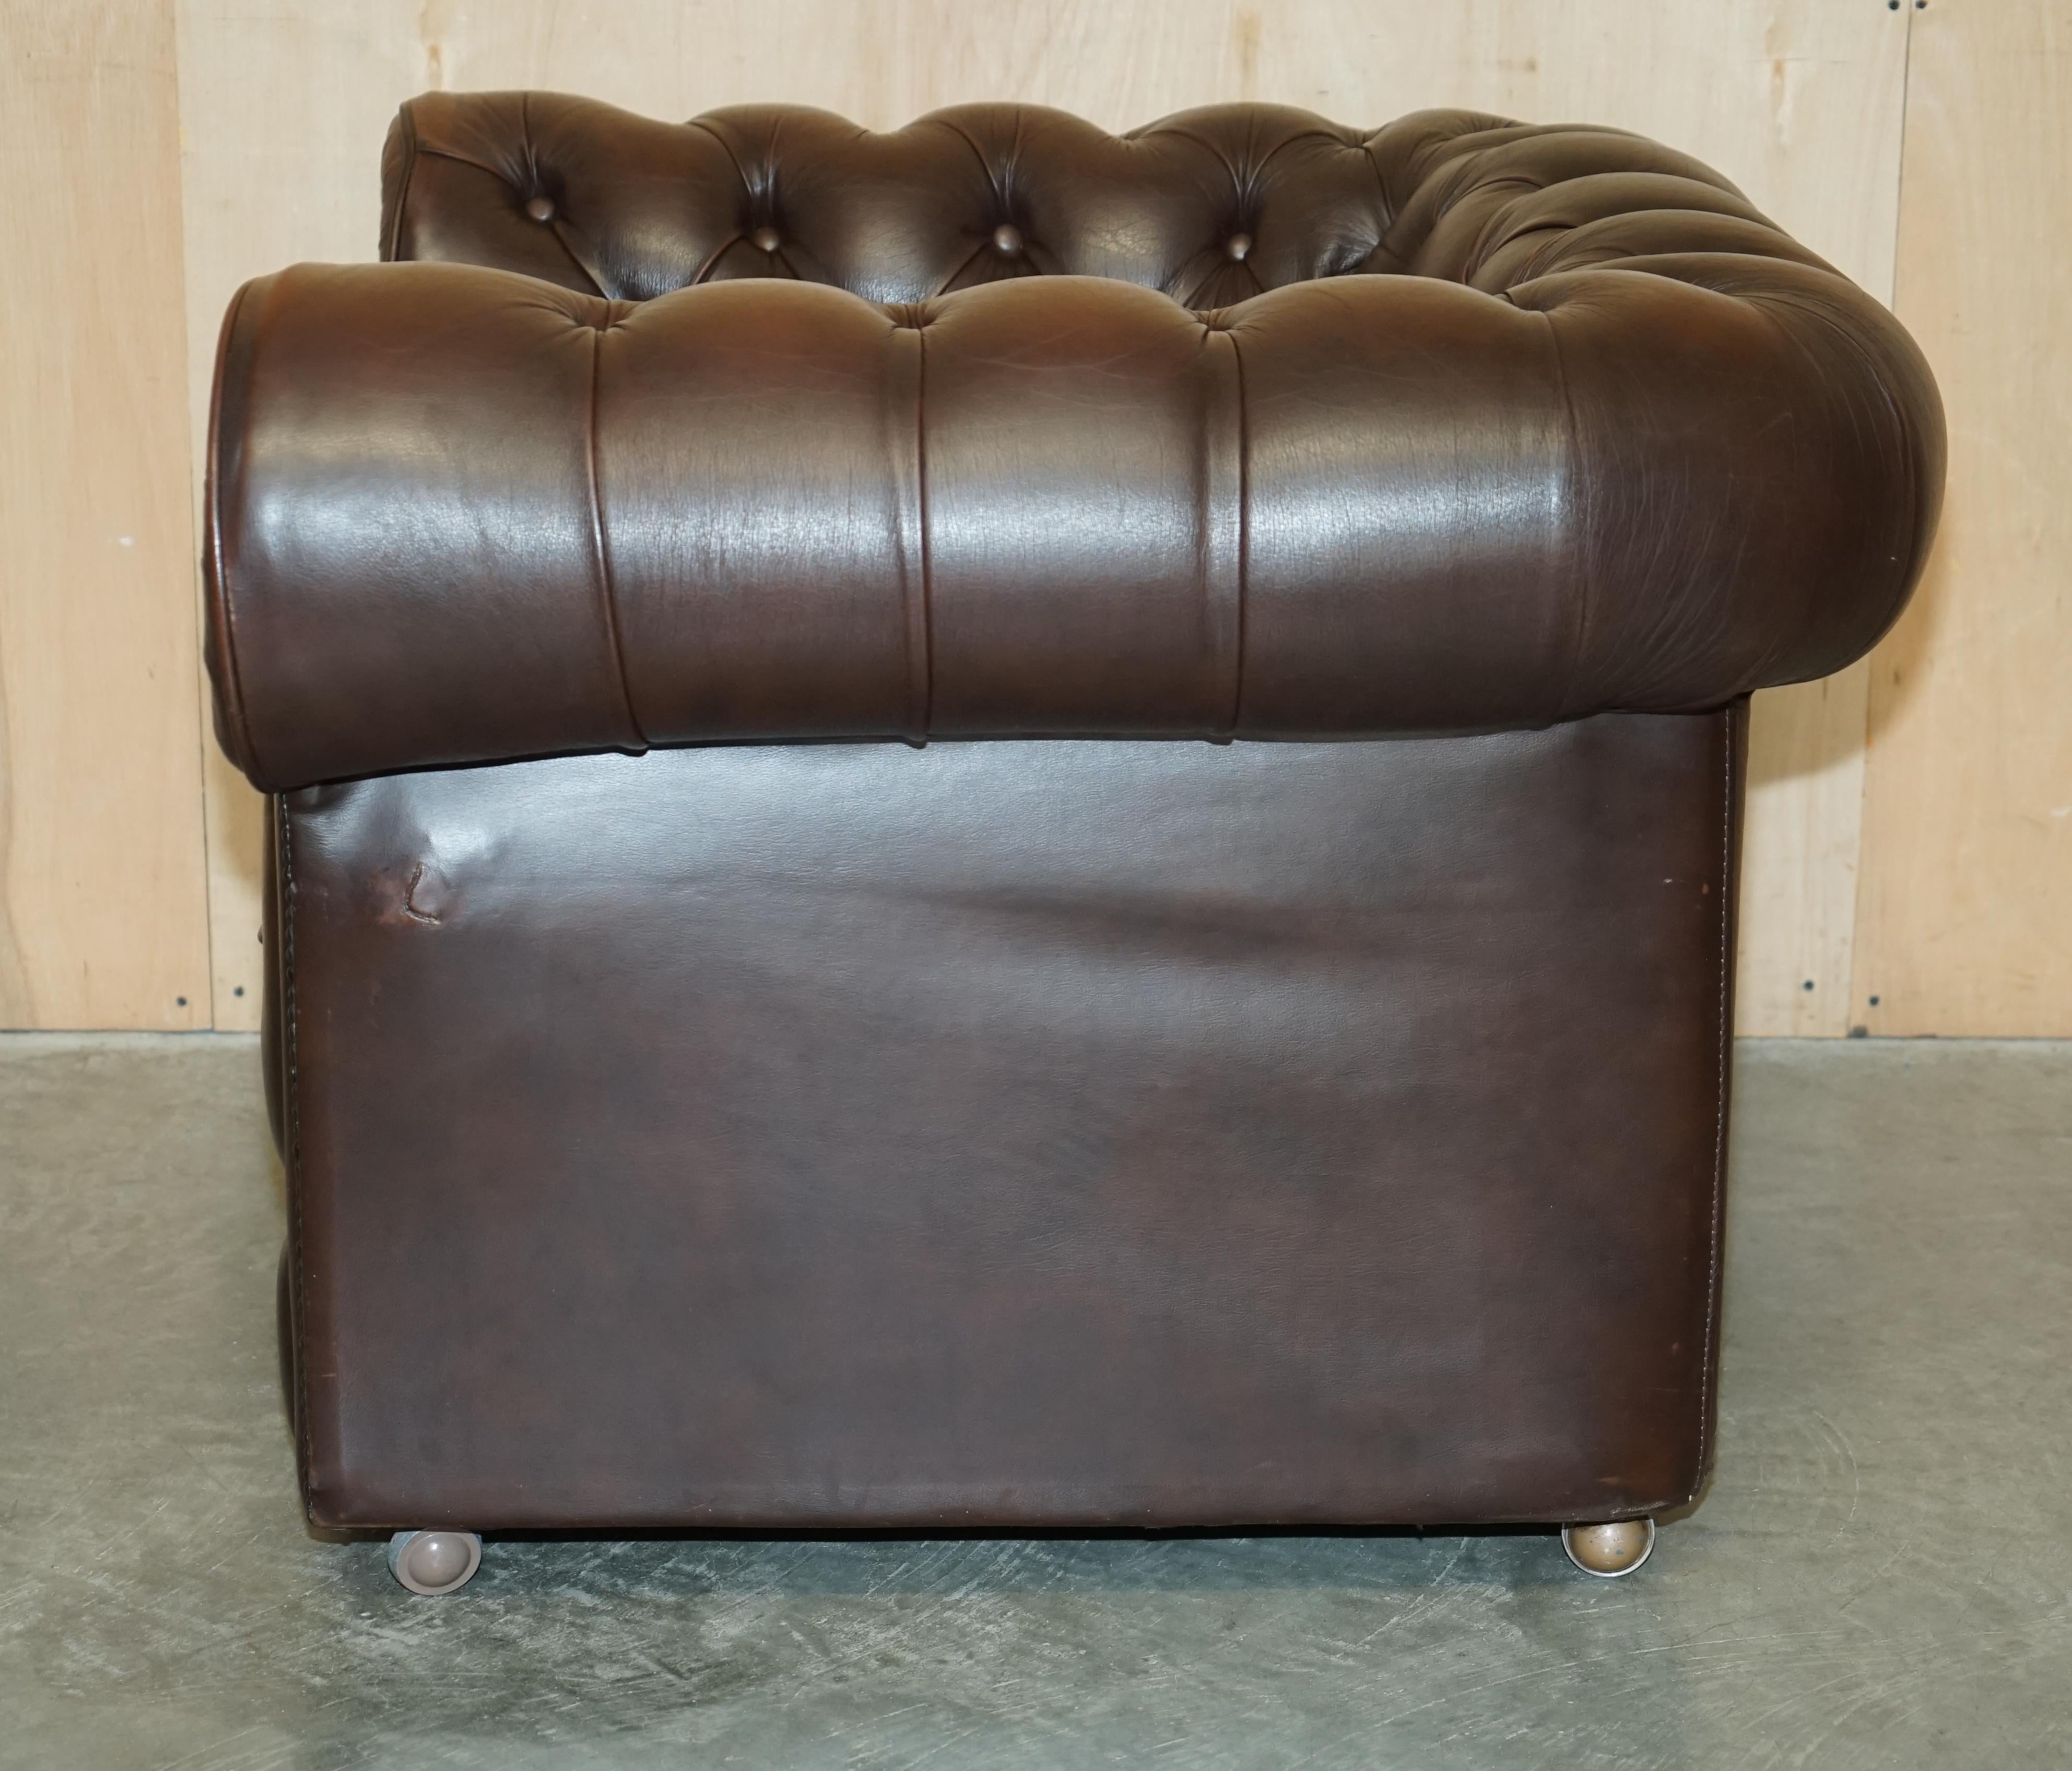 ViNTAGE THOMAS LLOYD MADE IN ENGLAND BROWN LEATHER CHESTERFIELD ARMCHAIR For Sale 10